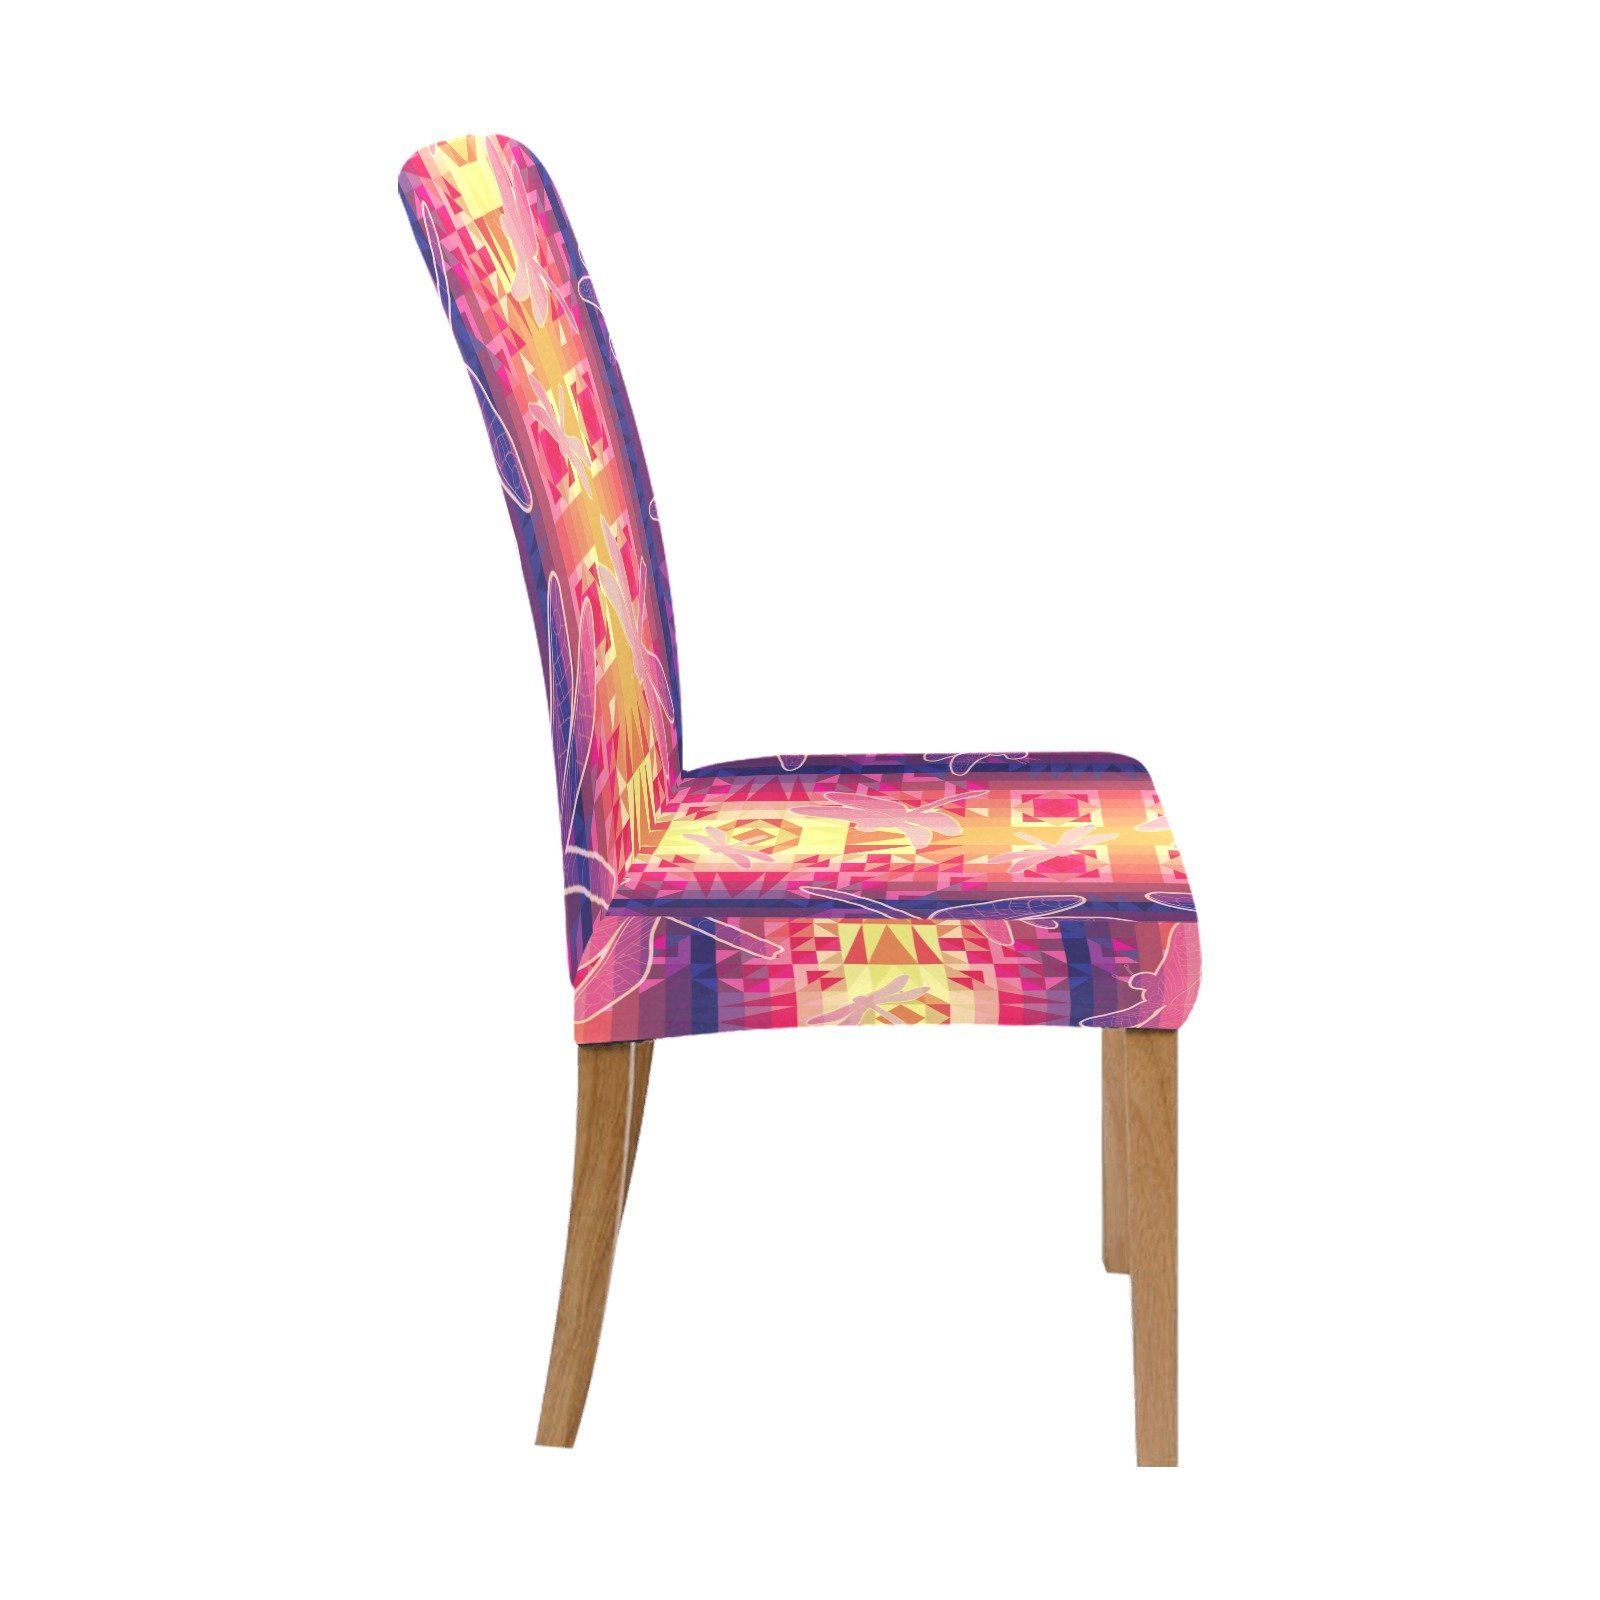 Kaleidoscope Dragonfly Chair Cover (Pack of 4) Chair Cover (Pack of 4) e-joyer 